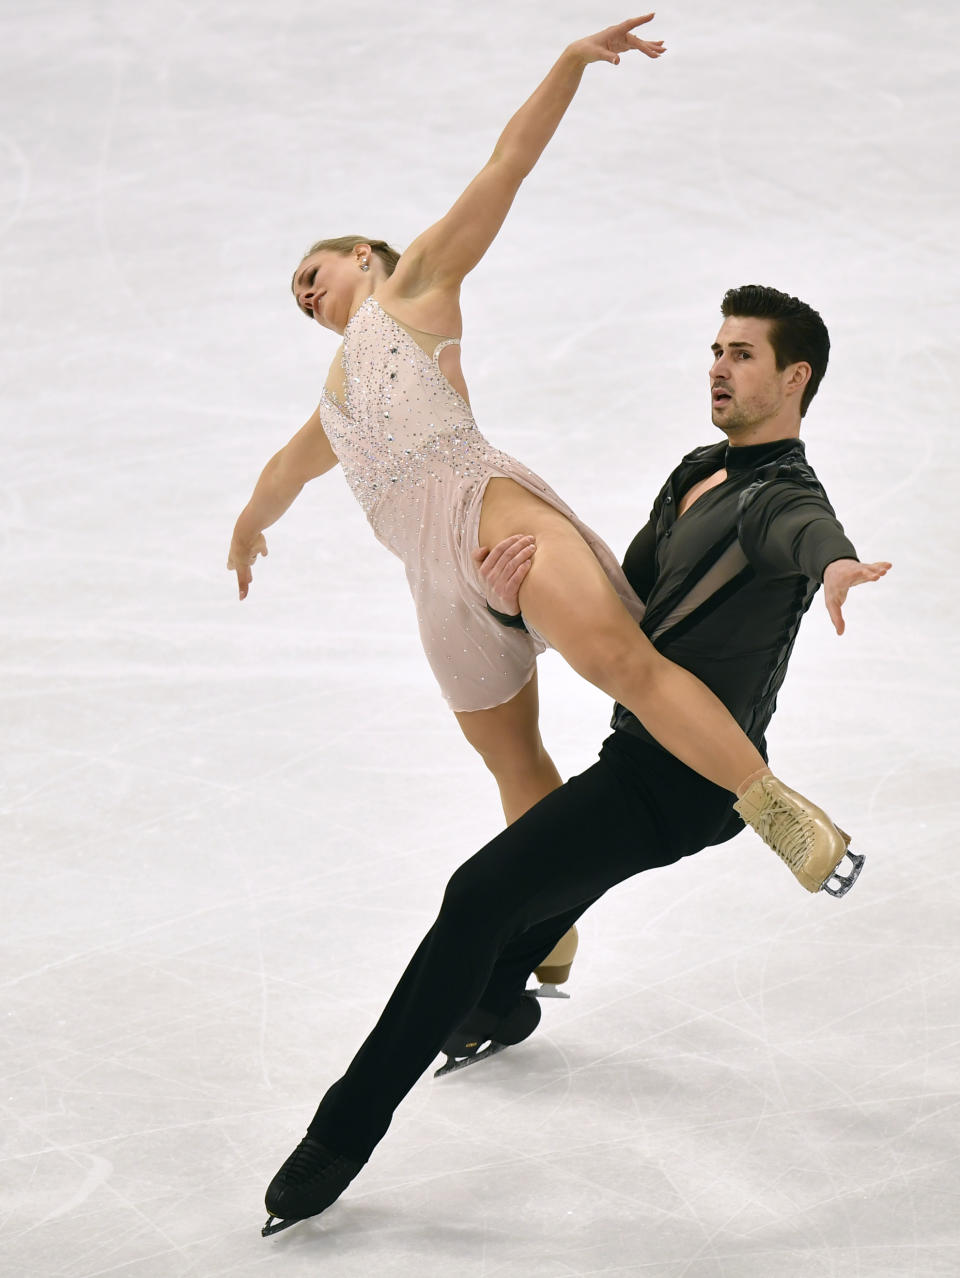 Madison Hubbell and Zachary Donohue of the USA perform during the Ice Dance-Free Dance at the Figure Skating World Championships in Stockholm, Sweden, Saturday, March 27, 2021. (AP Photo/Martin Meissner)